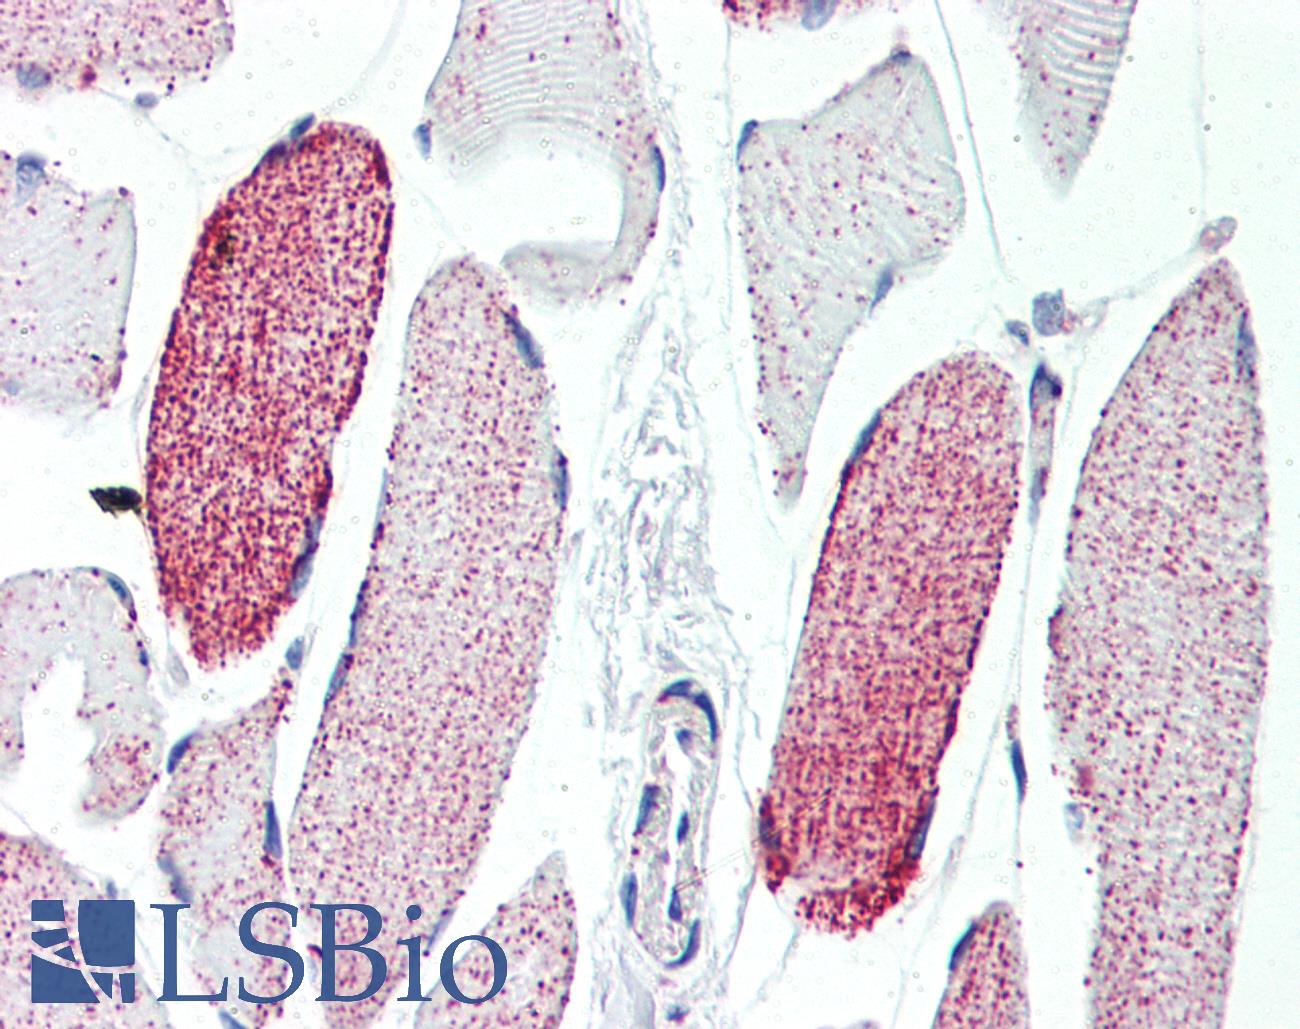 ACO2 / Aconitase 2 Antibody - Anti-ACO2 antibody IHC of human skeletal muscle. Immunohistochemistry of formalin-fixed, paraffin-embedded tissue after heat-induced antigen retrieval. Antibody concentration 10 ug/ml.